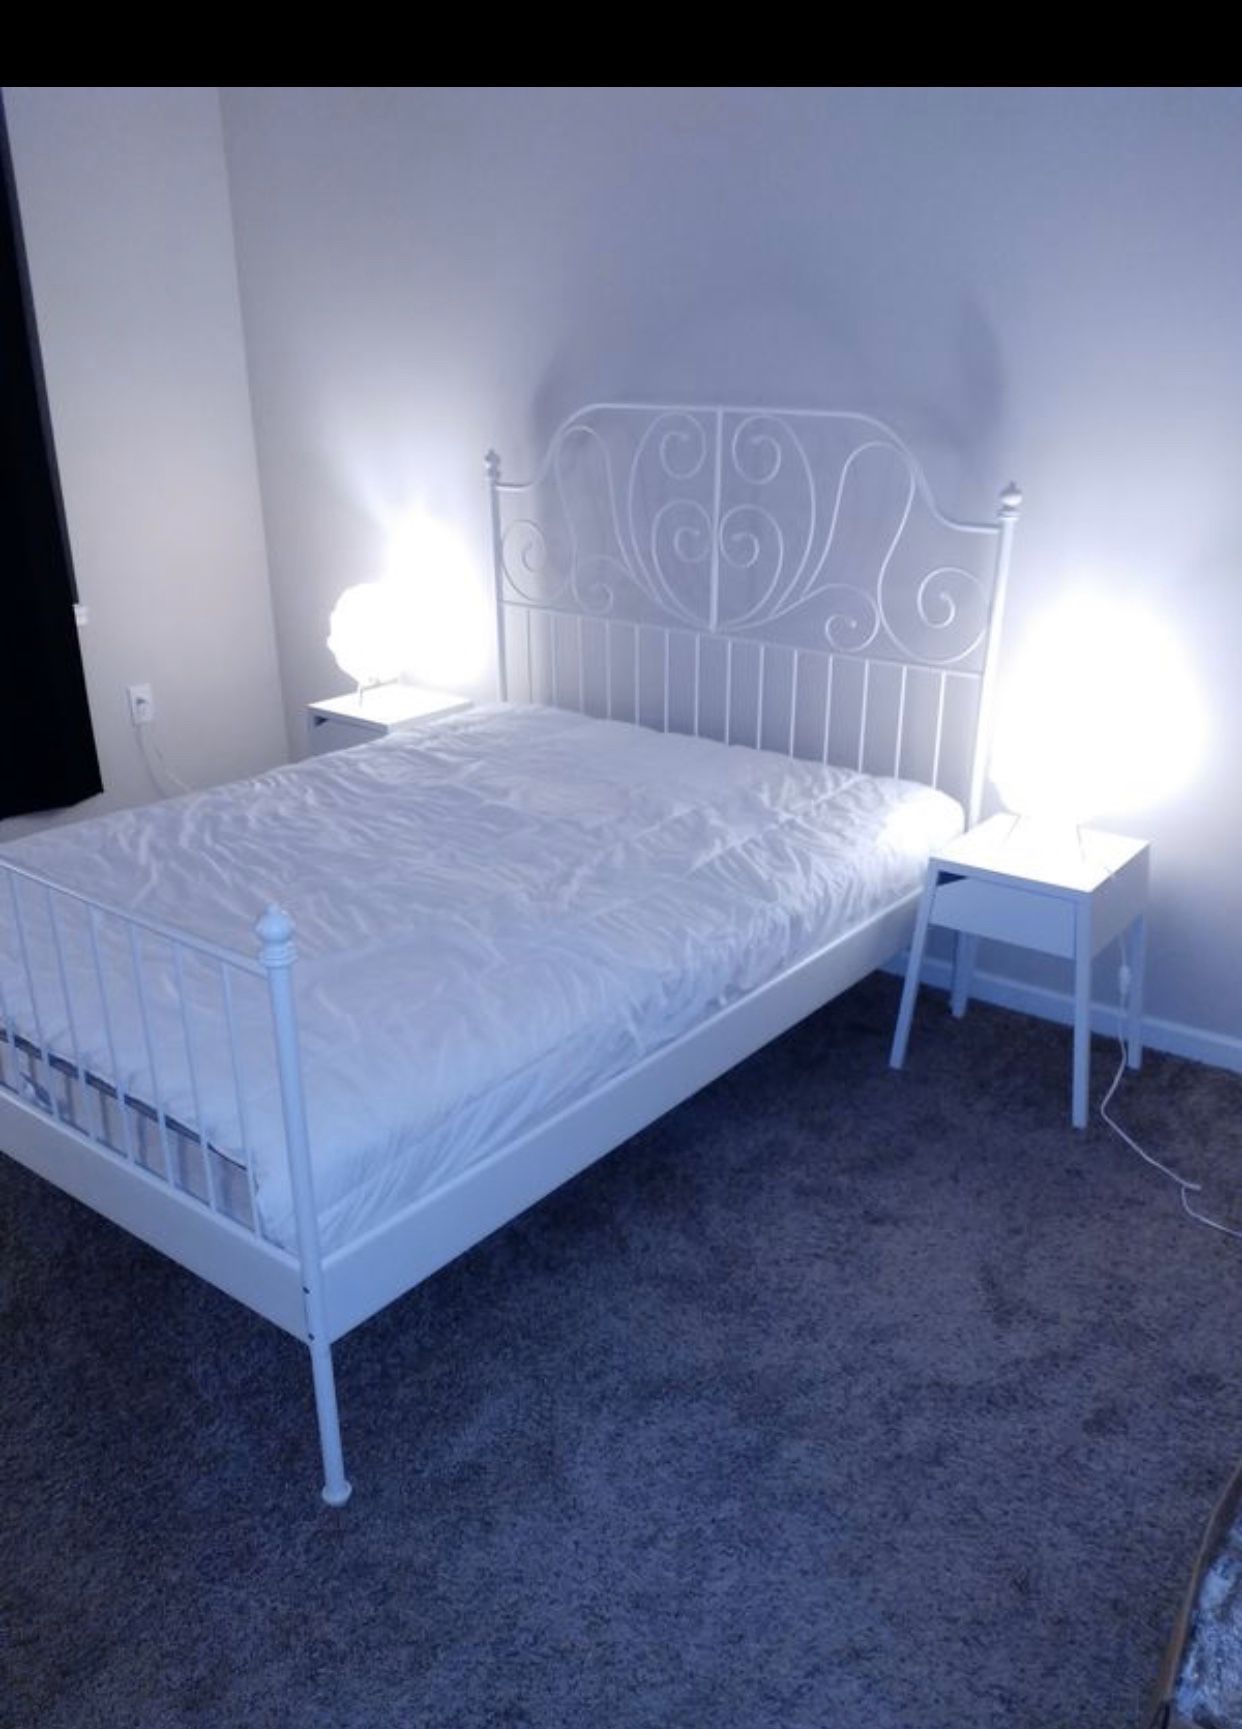 Bed frame and big floor lamp